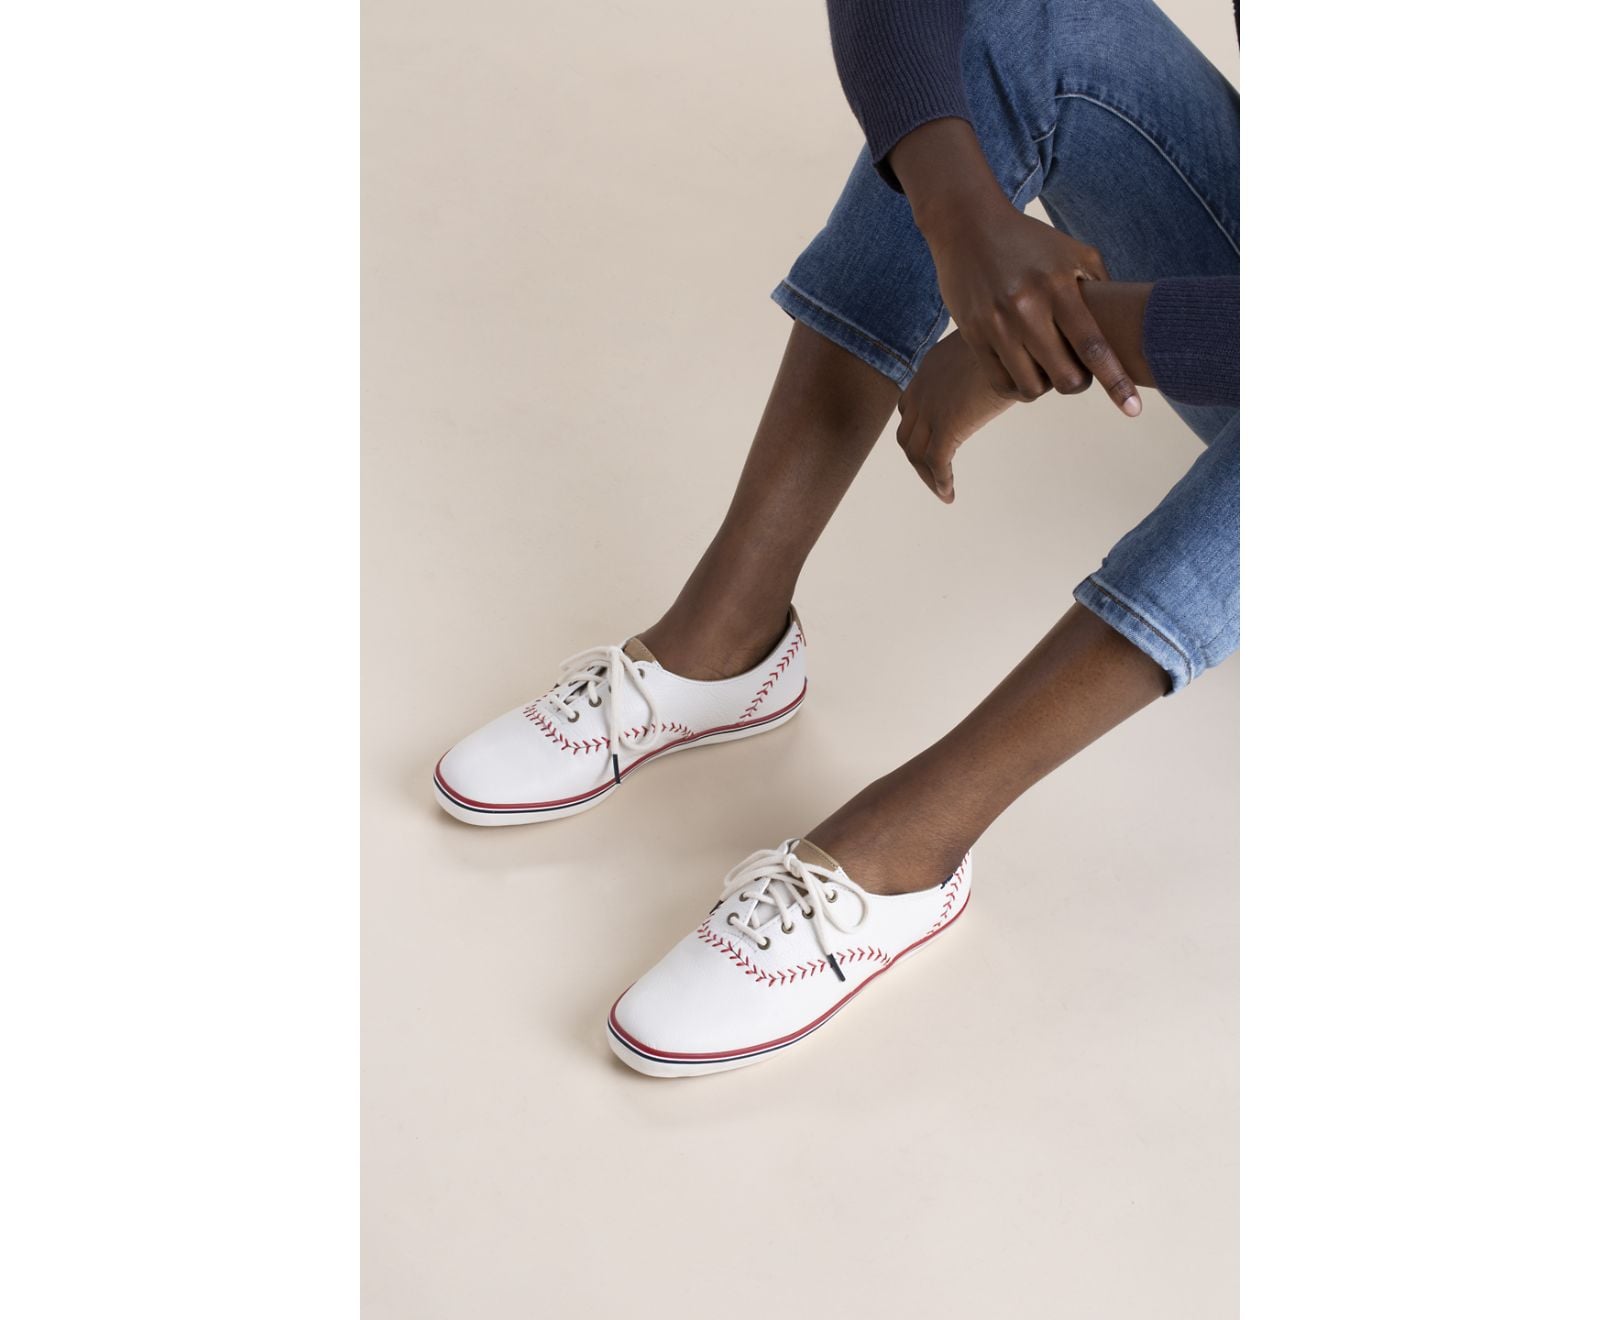 pakket Mogelijk Moet Not Your Average Pair: Keds Champion Pennant Leather Sneakers | Here Are 15  Pairs of Keds Sneakers For When You Want to Be Stylish but Casual |  POPSUGAR Fashion Photo 9